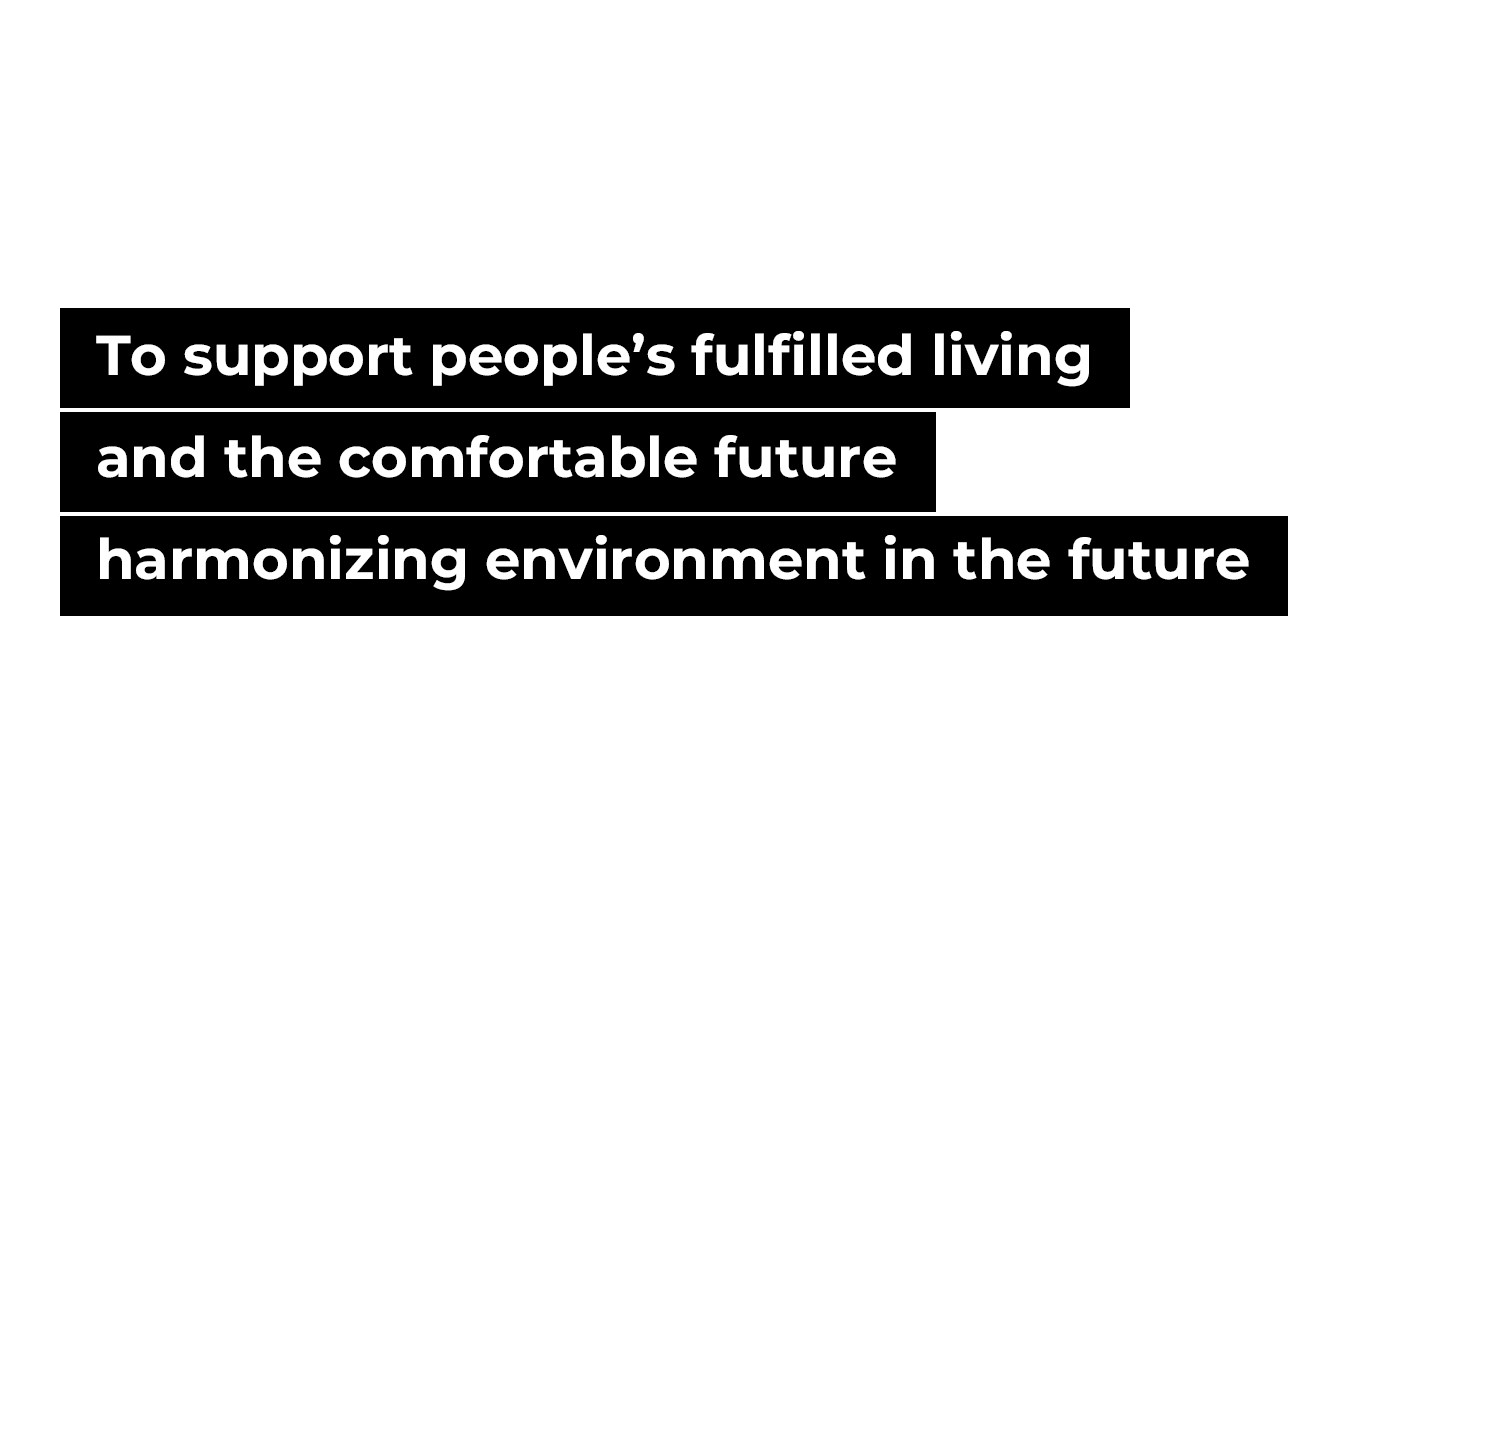 To support people’s fulfilled living and the comfortable future harmonizing environment in the future